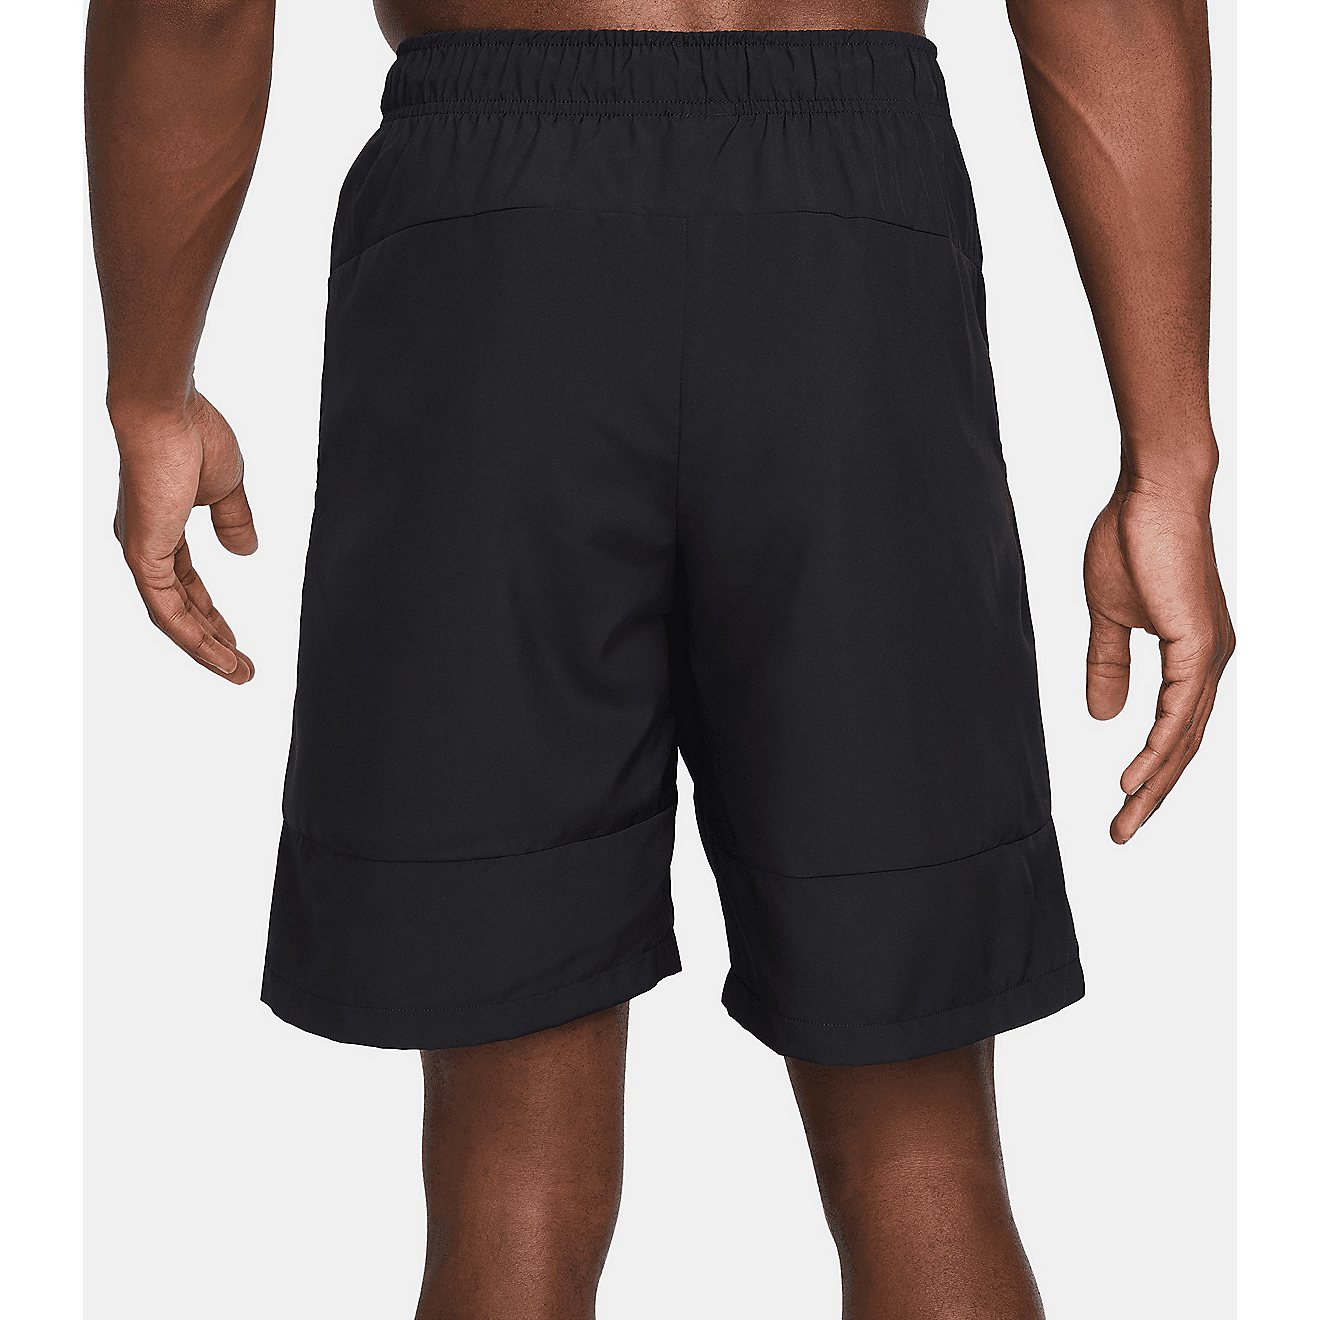 NIke Men's Dri-FIT Flex Woven Training Shorts 9 in                                                                               - view number 2